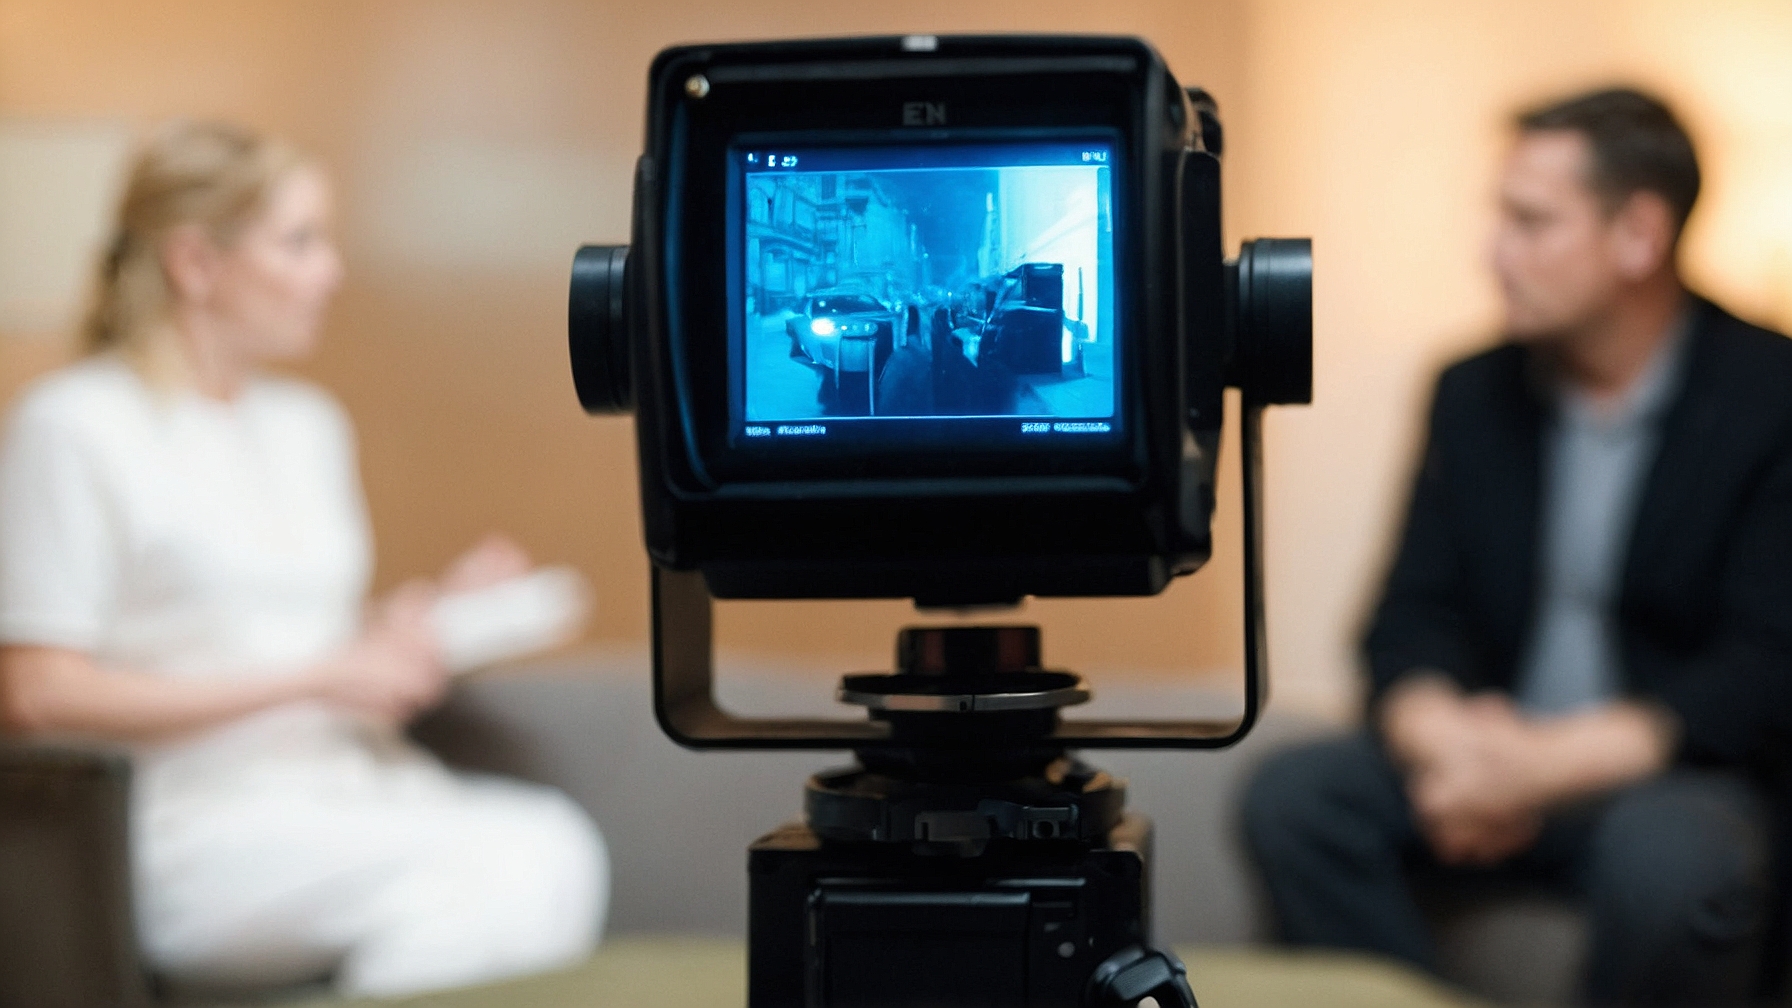 Conclusion and Next Steps for Video Production and Marketing